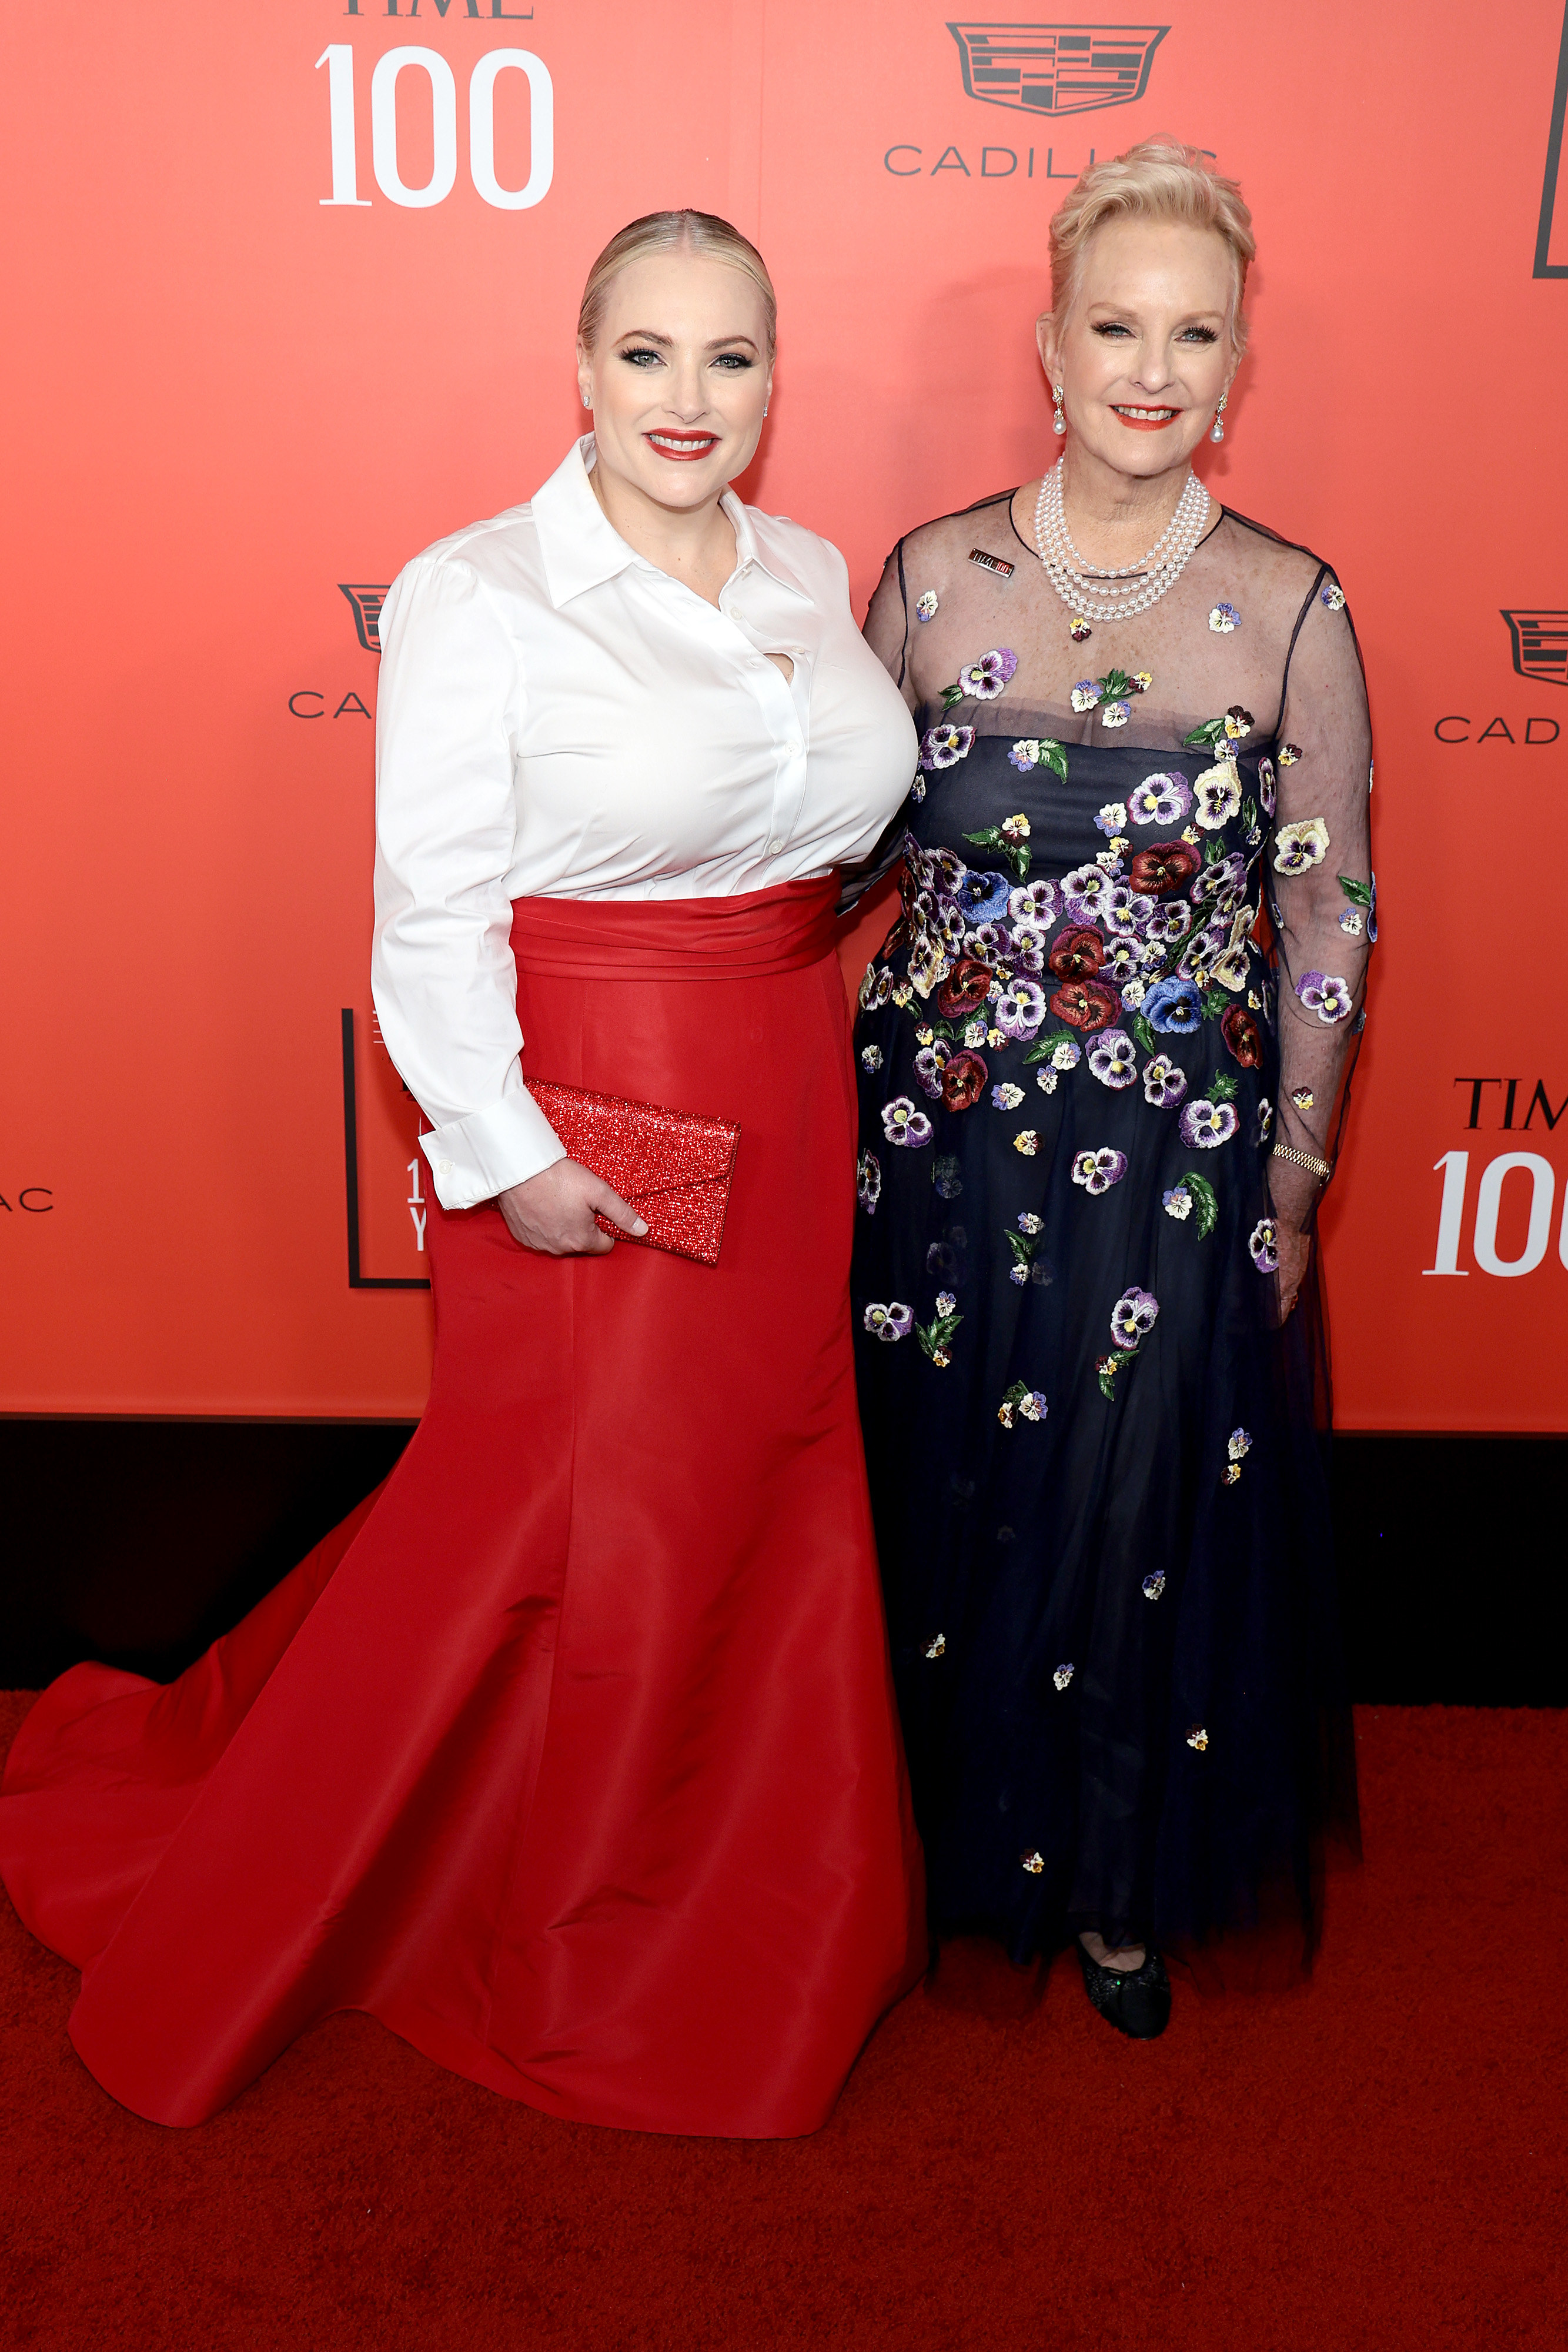 Meghan with her mom, Cindy McCain, on the red carpet